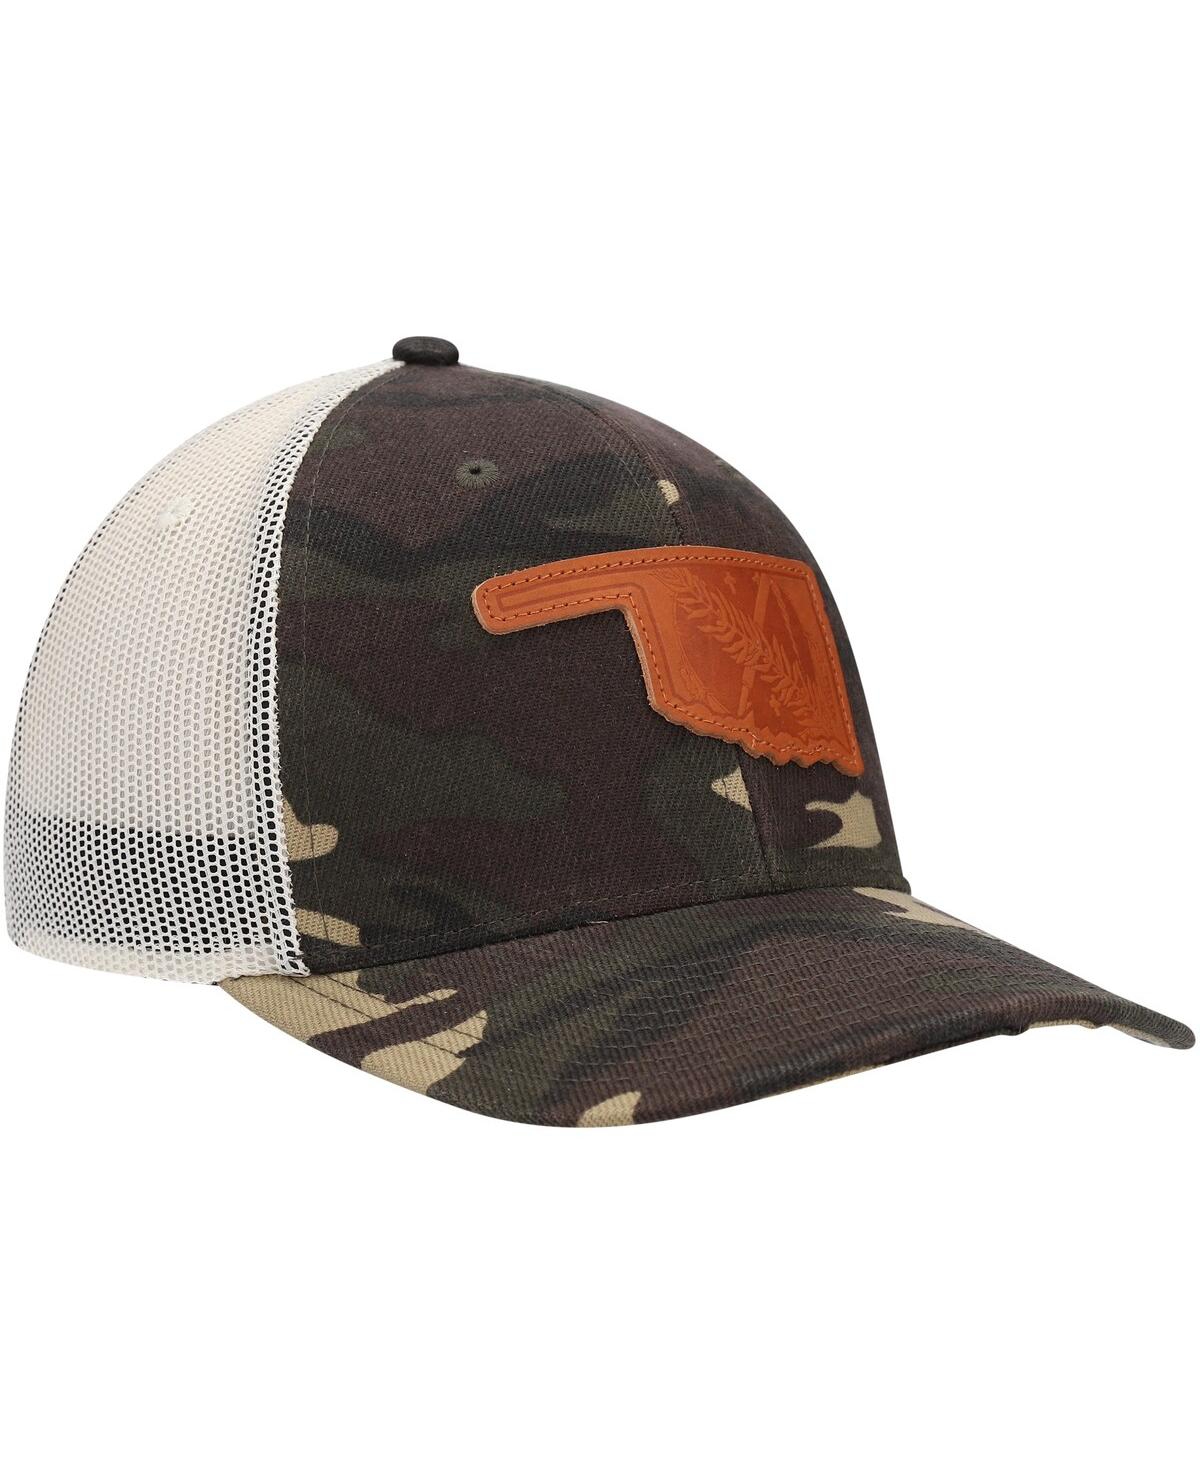 Shop Local Crowns Men's  Camo Oklahoma Icon Woodland State Patch Trucker Snapback Hat